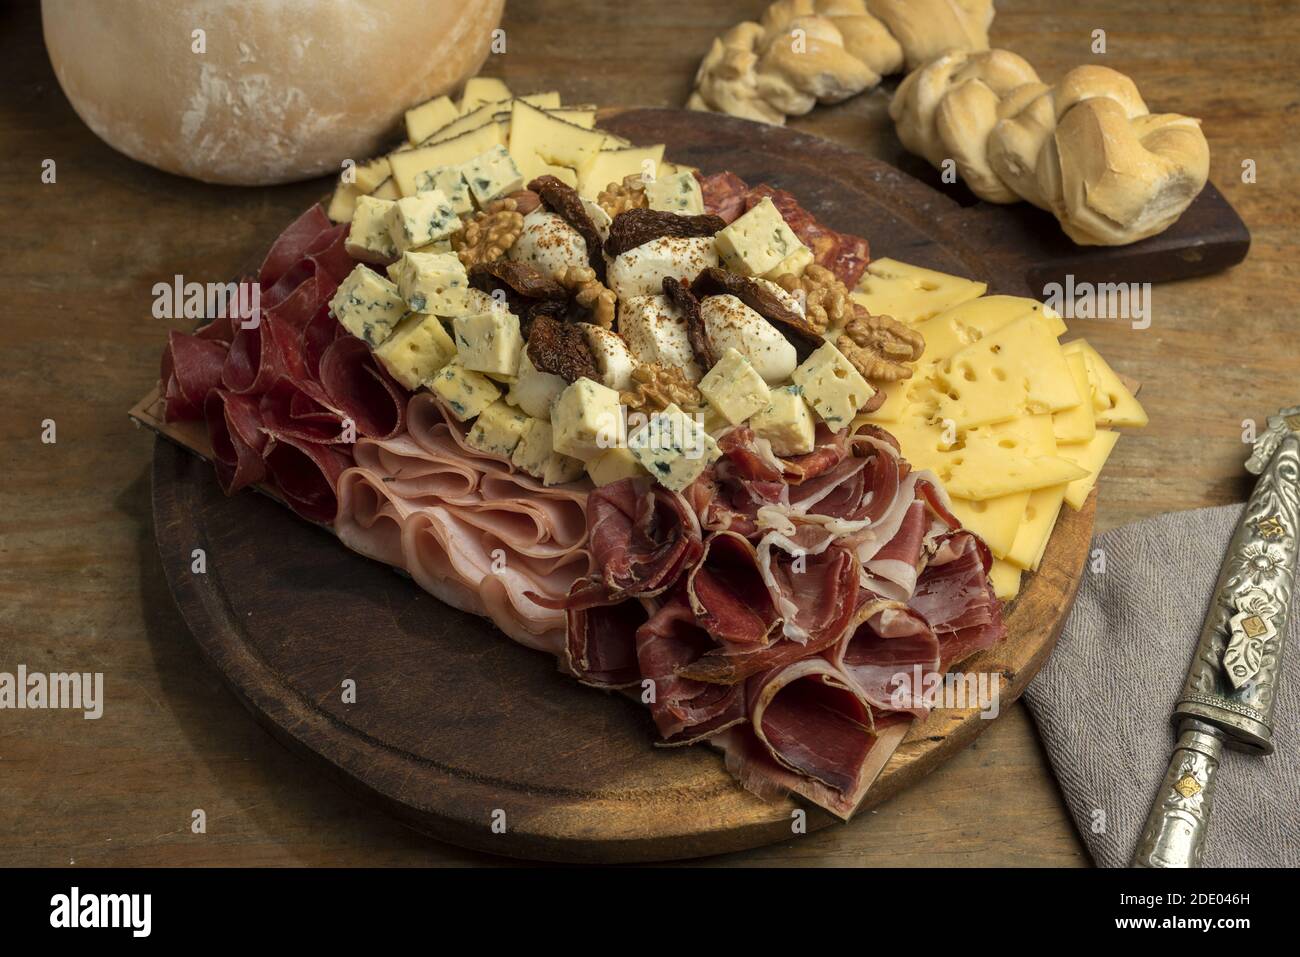 A high angle shot of a gourmet delicious charcuterie board with different meats and cheeses Stock Photo